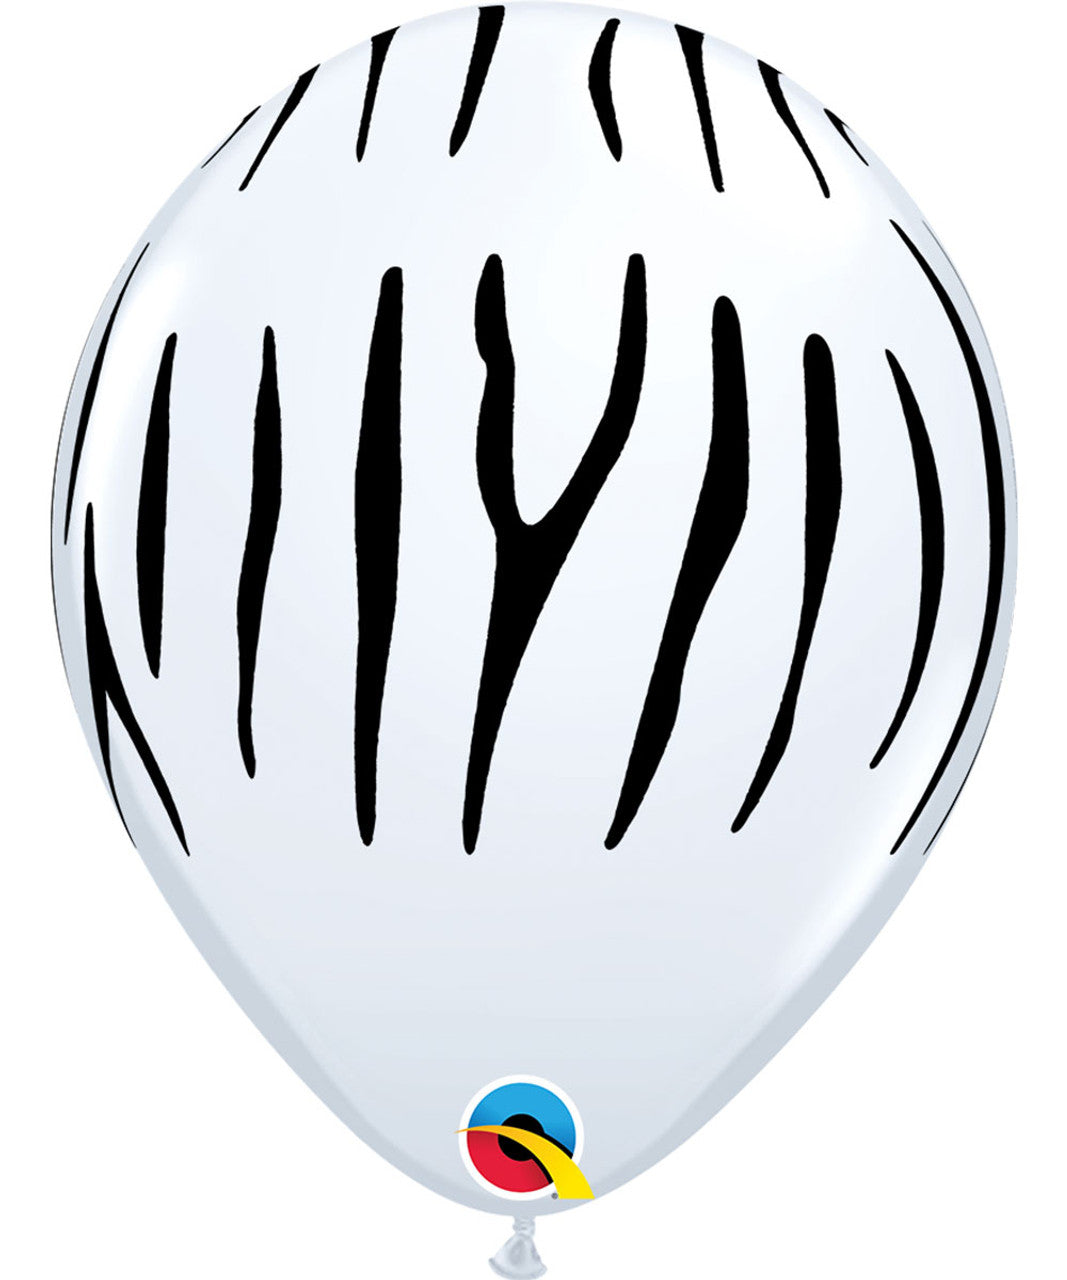 10 - Printed Latex Bouquet - Choose Your Balloon Print(s)